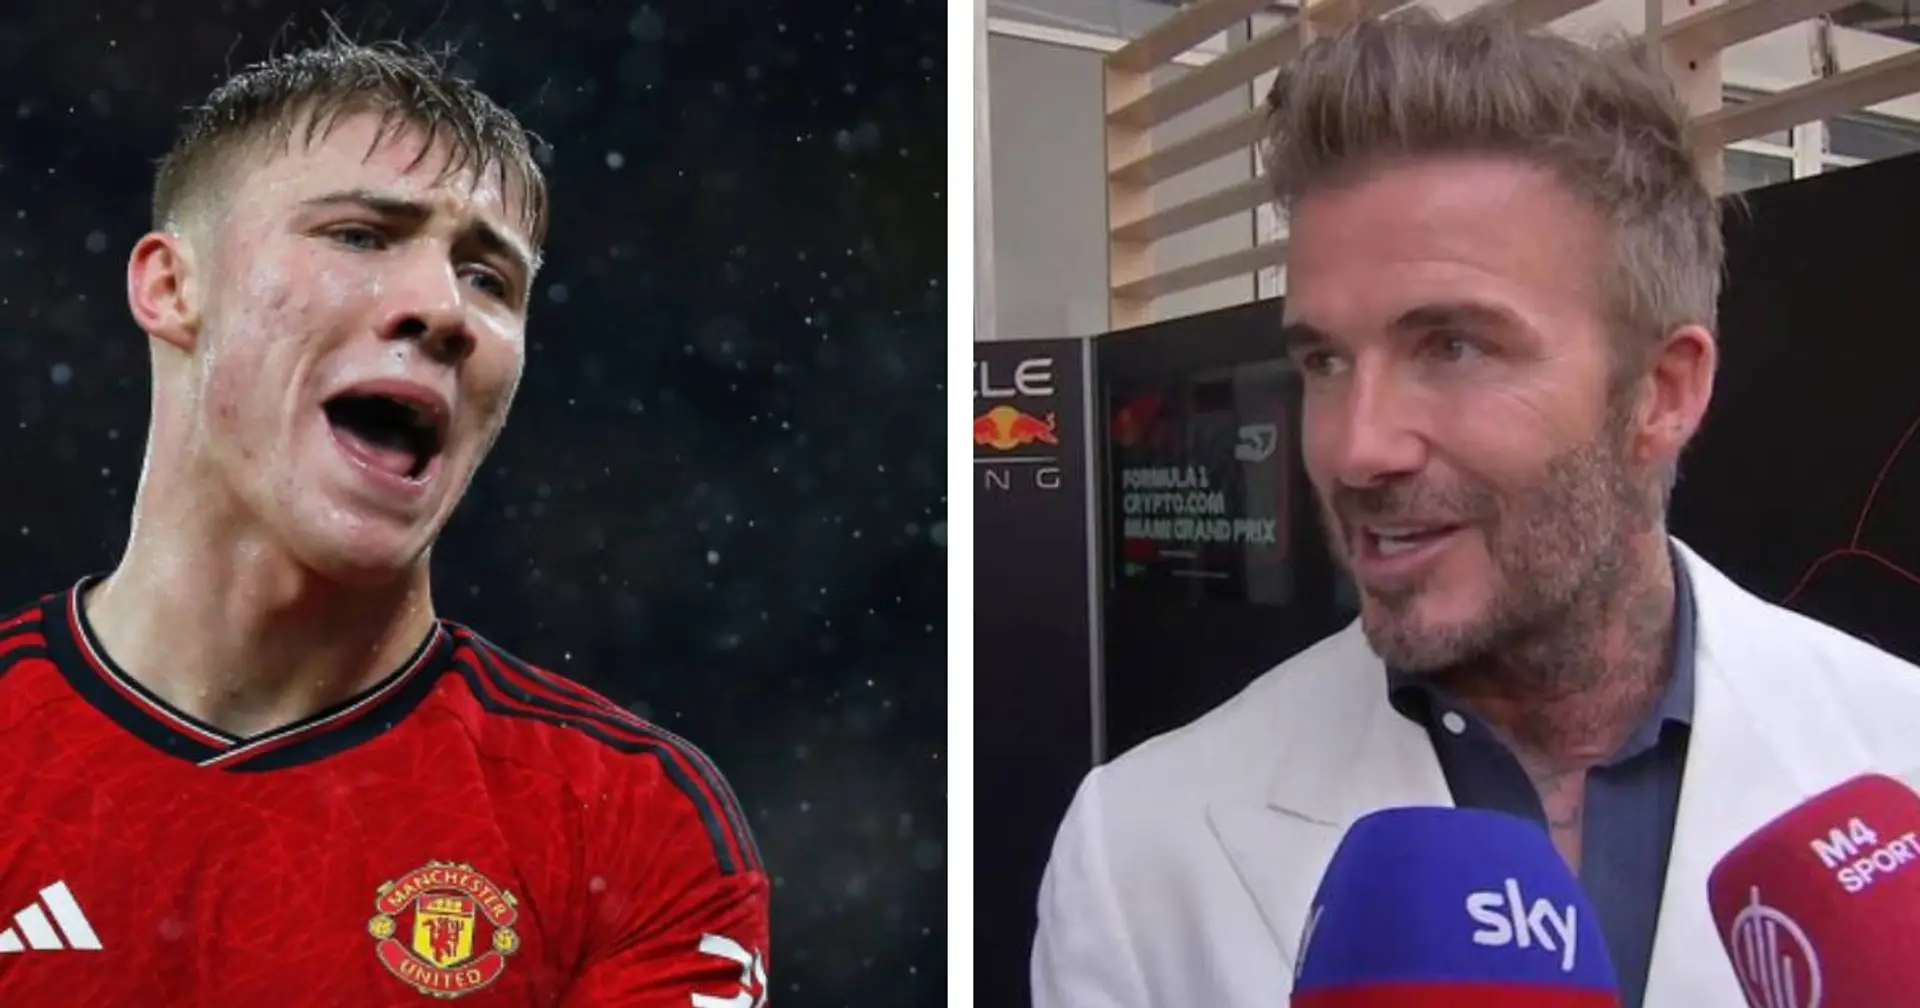 'You're in the wrong team': David Beckham gives Man United players harsh reality check ahead of FA Cup final